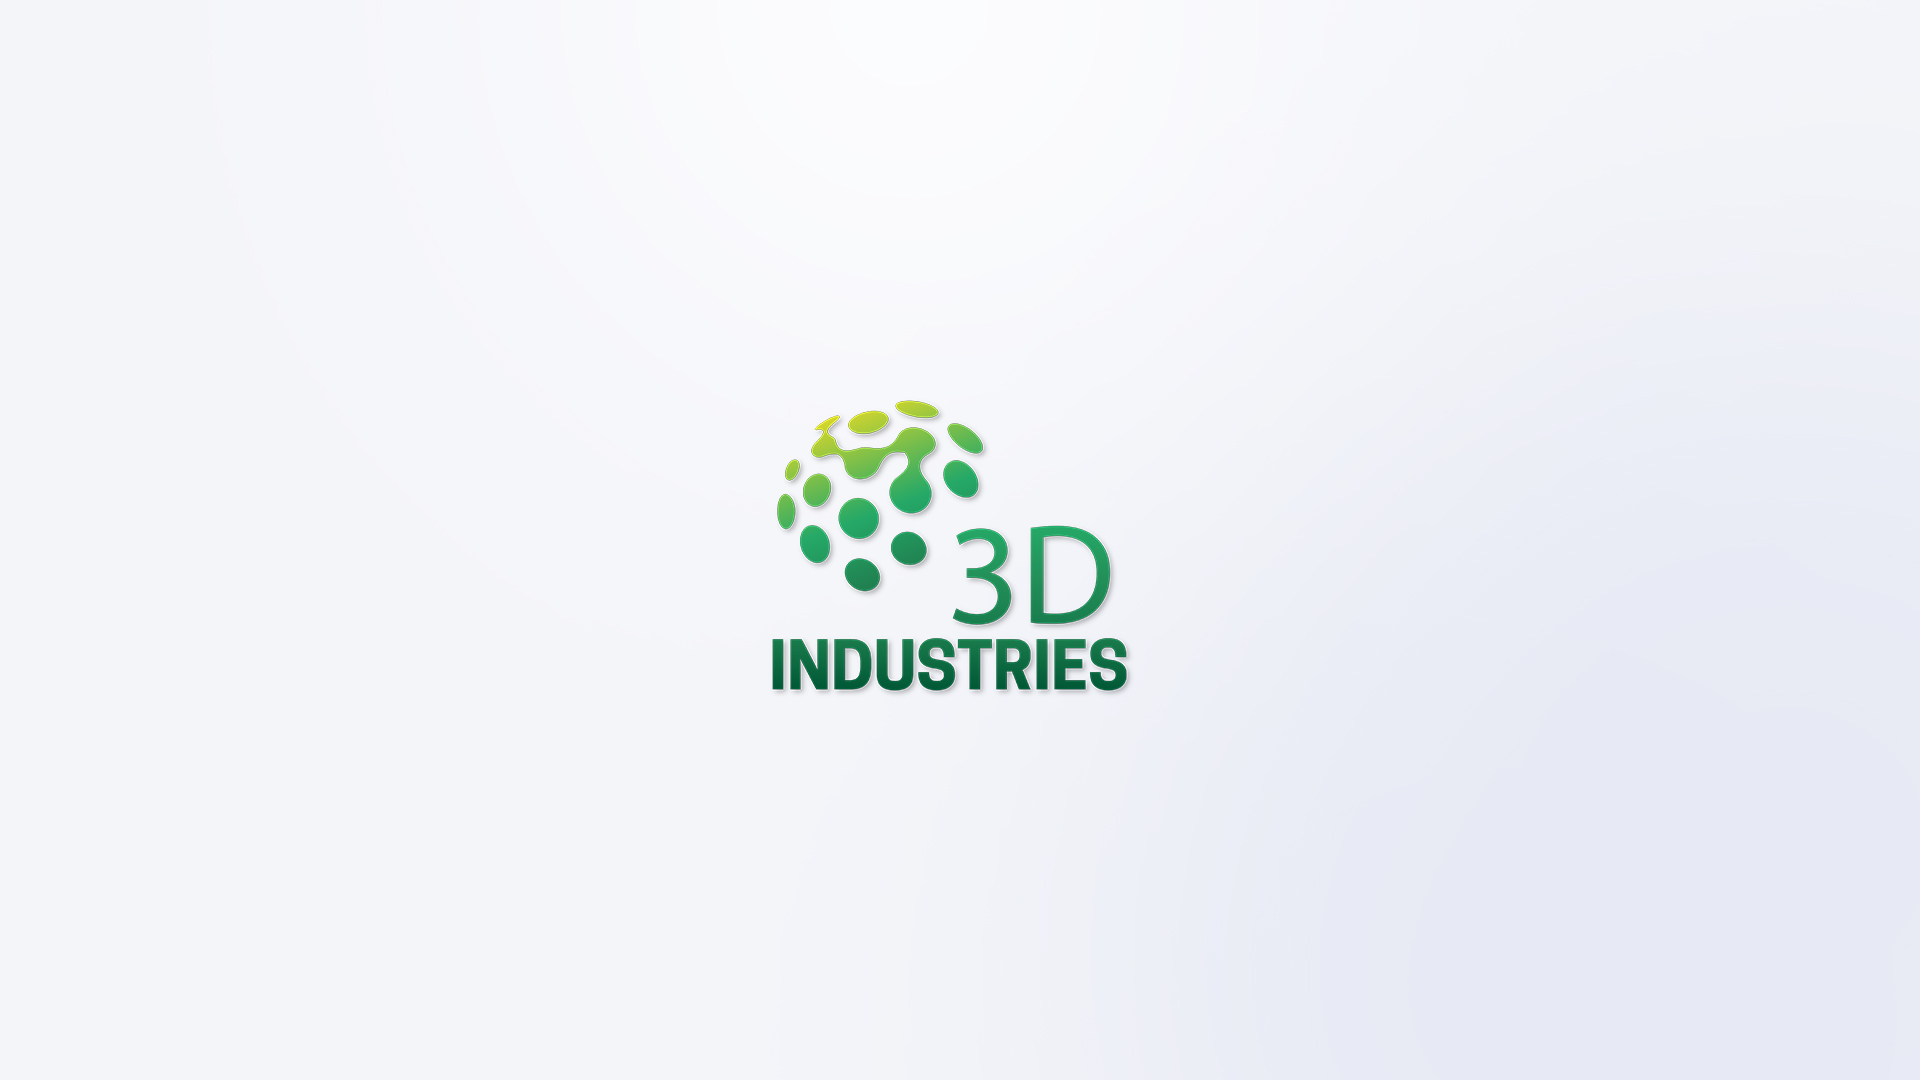 3D Industries and Roboze together to push French industries